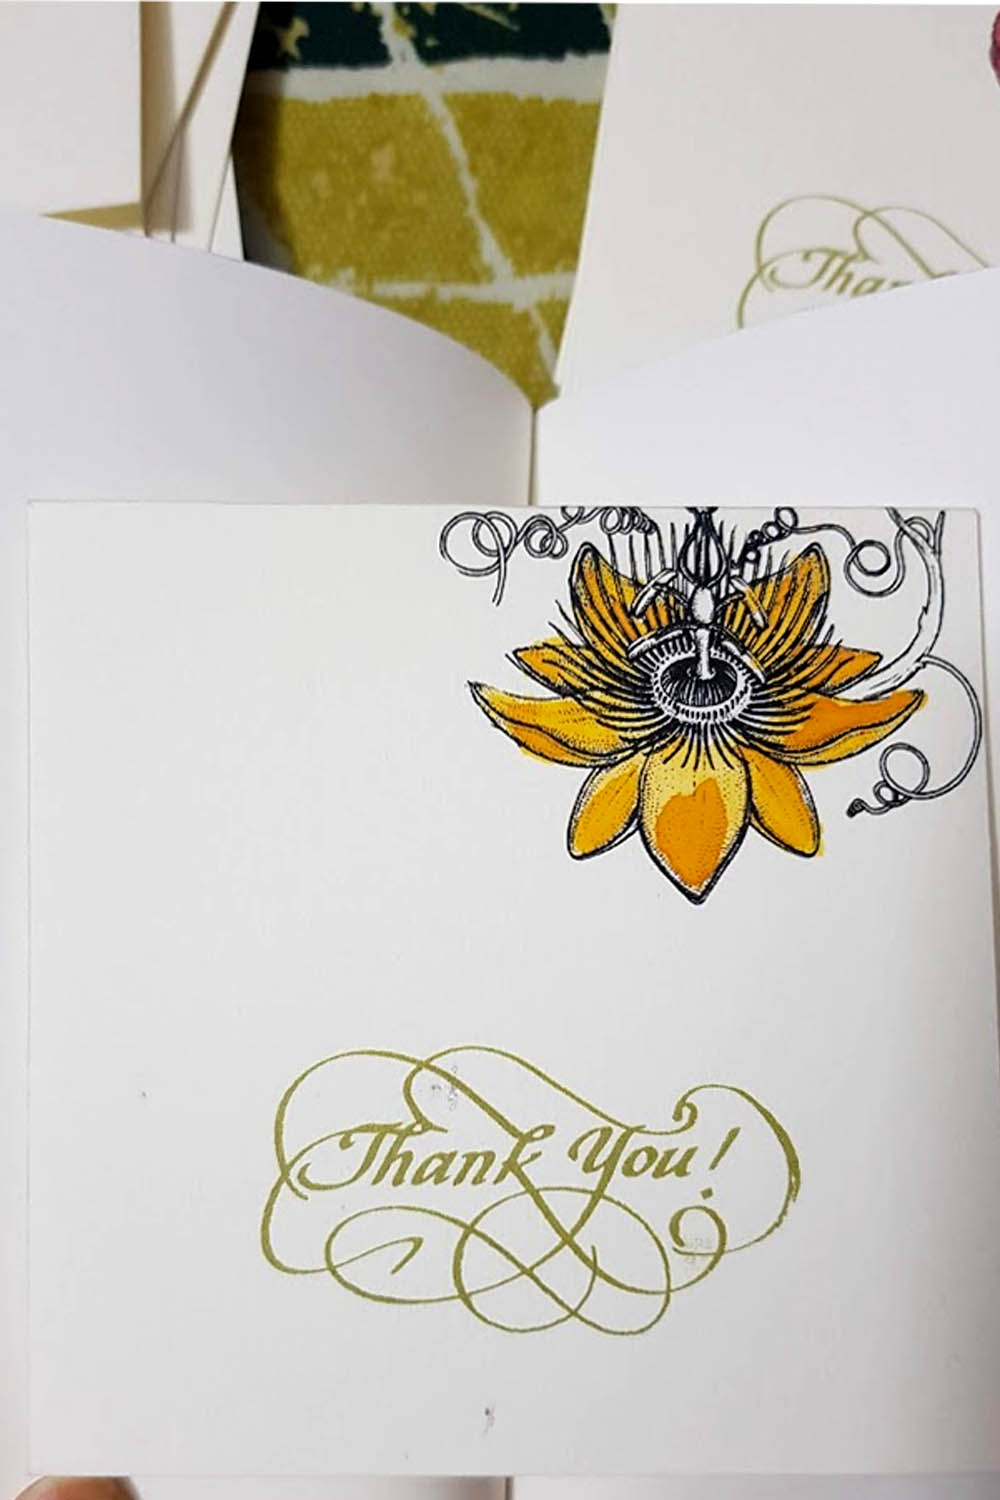 Thank you cards2